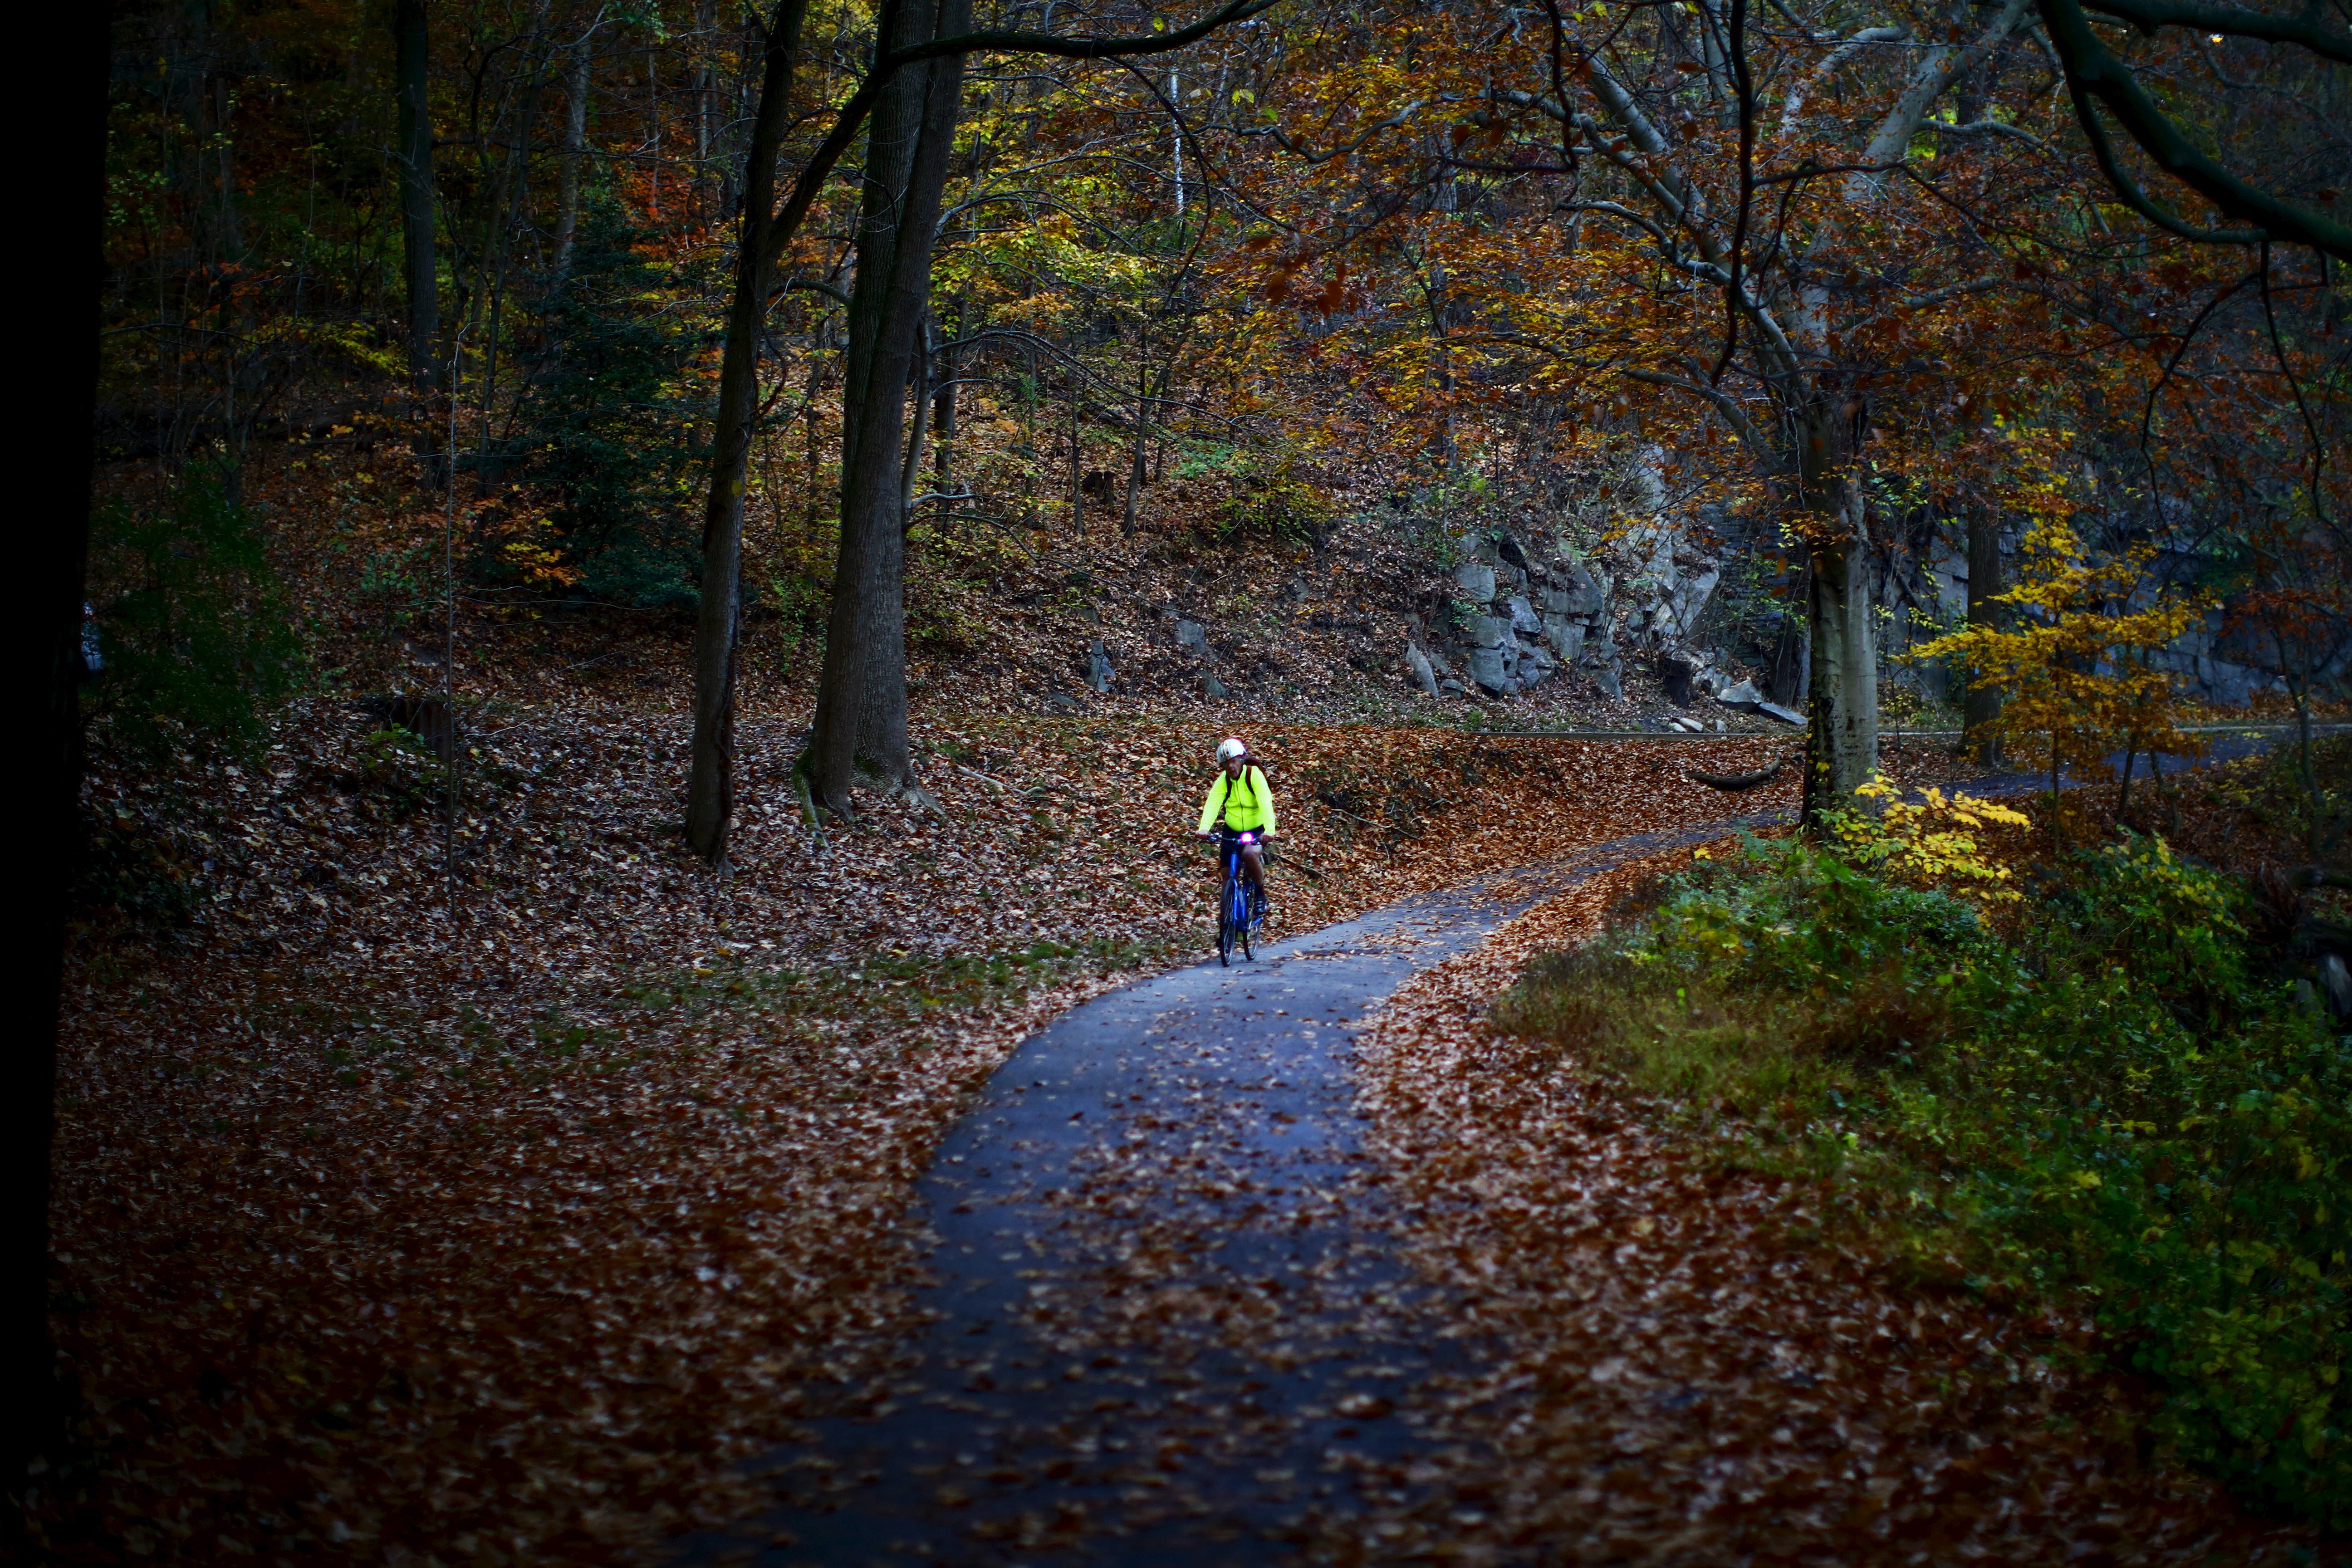 A cyclist in a yellow jacket in Rock Creek Park. No cars in sight!